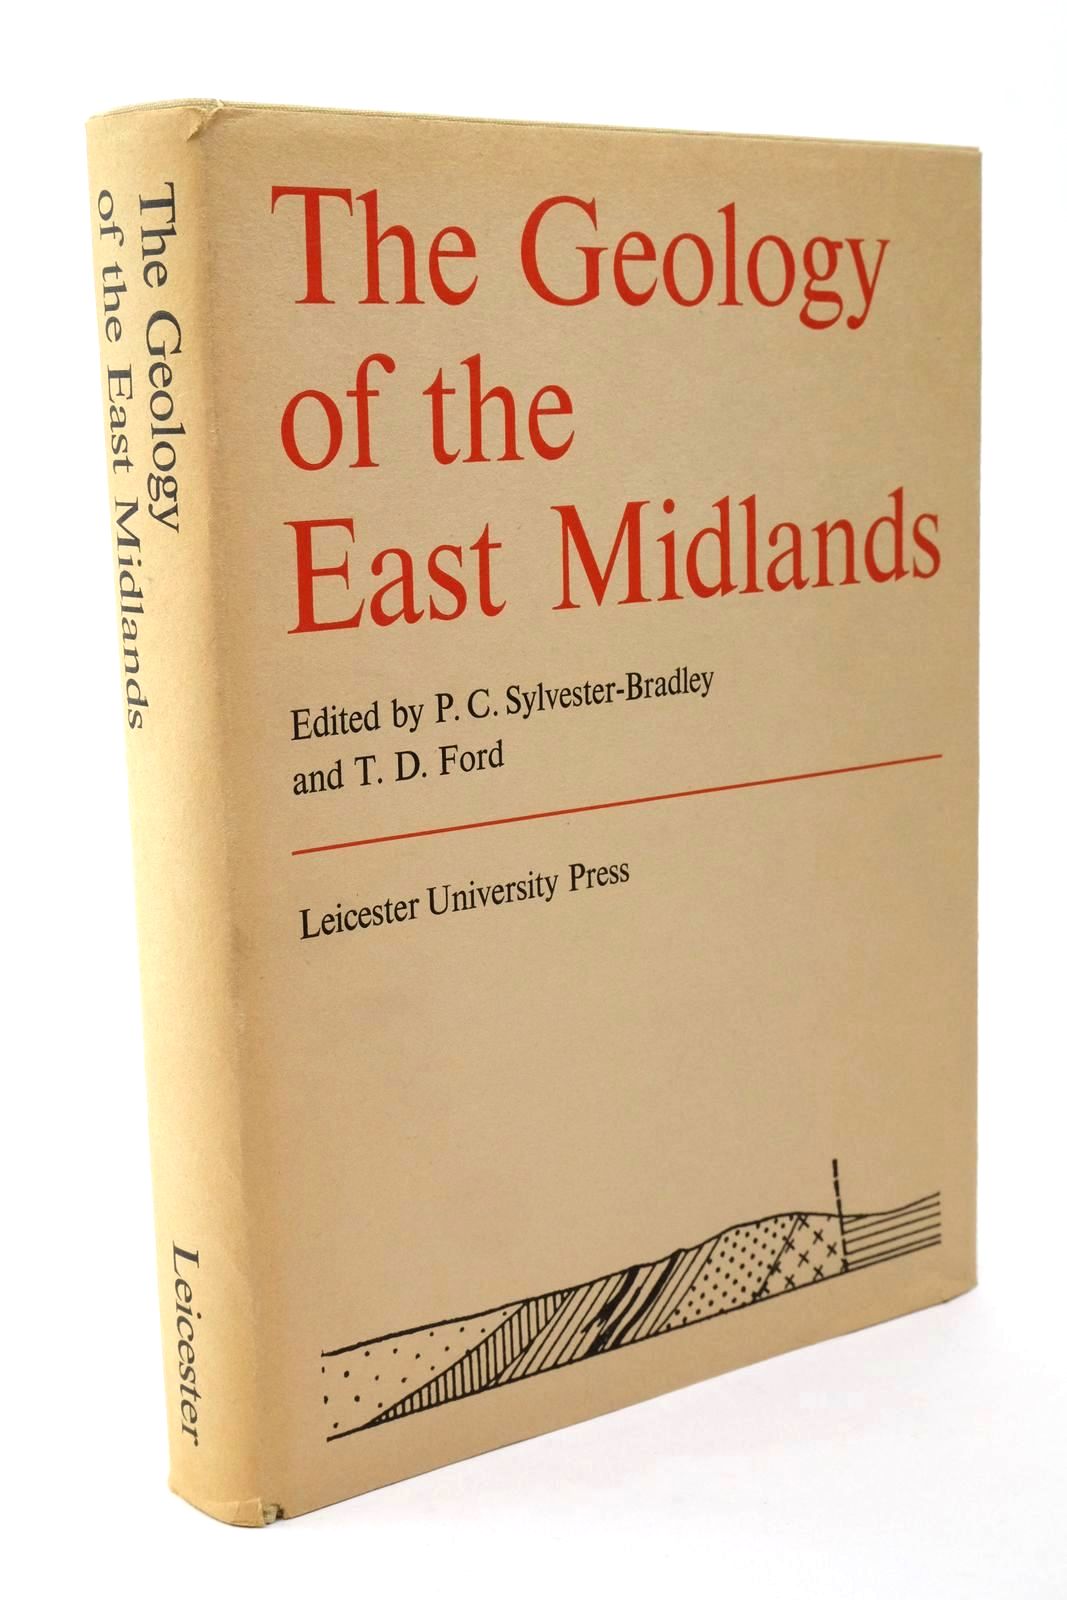 Photo of THE GEOLOGY OF THE EAST MIDLANDS written by Sylvester-Bradley, P.C. Ford, T.D. published by Leicester University Press (STOCK CODE: 1322494)  for sale by Stella & Rose's Books